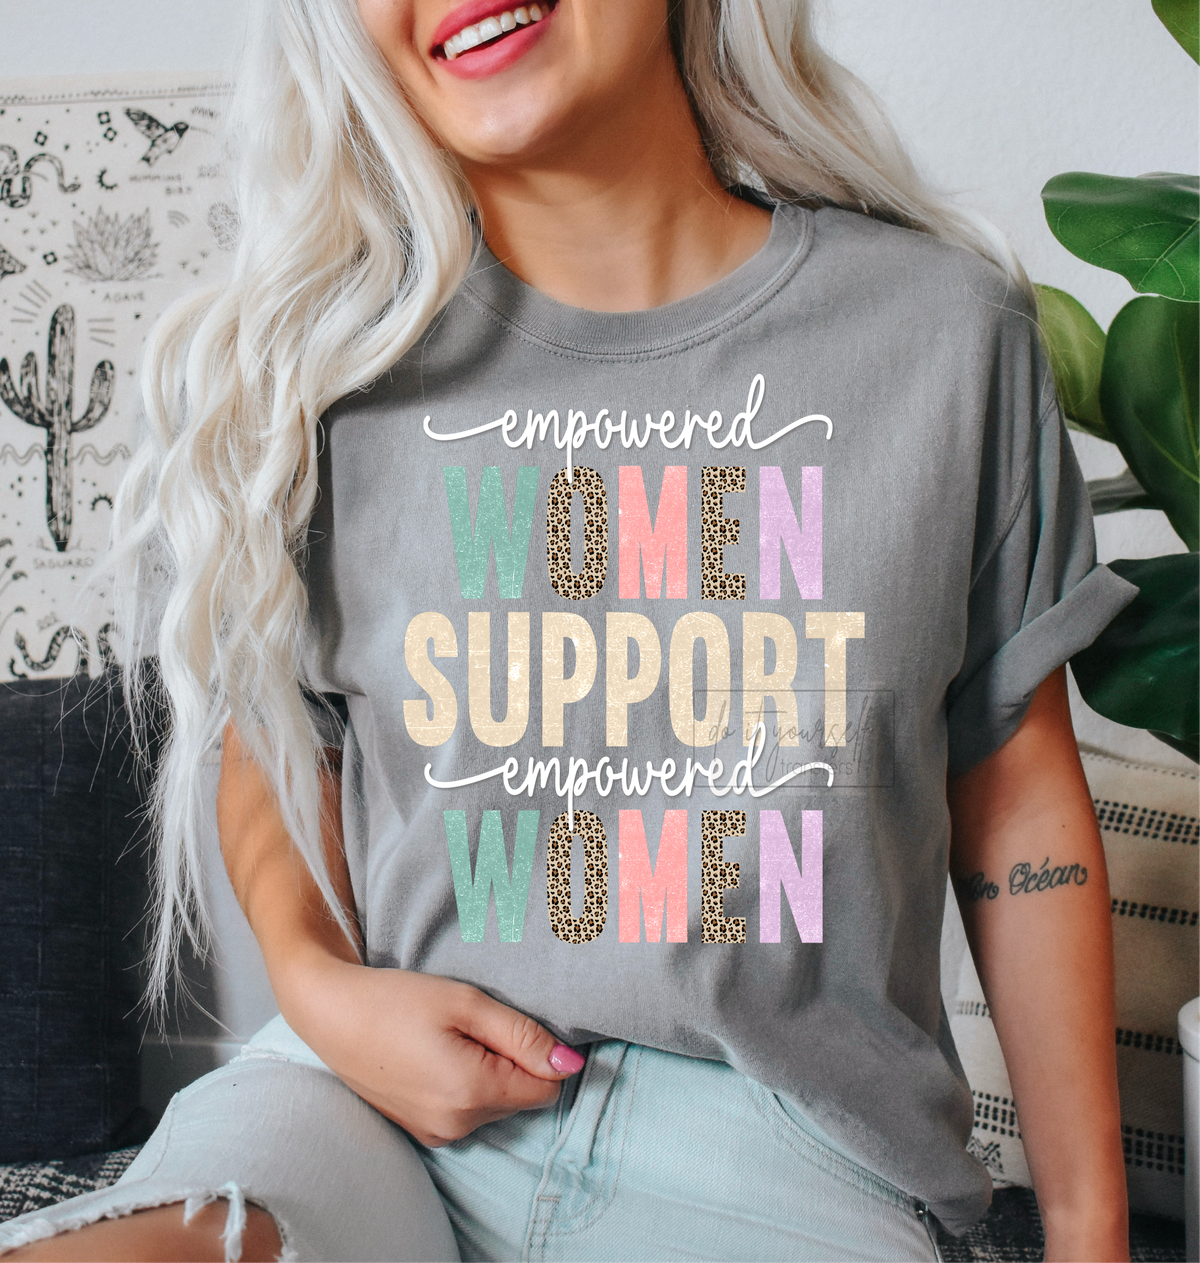 Empowered Women Support Empowered Women  size  DTF TRANSFERPRINT TO ORDER